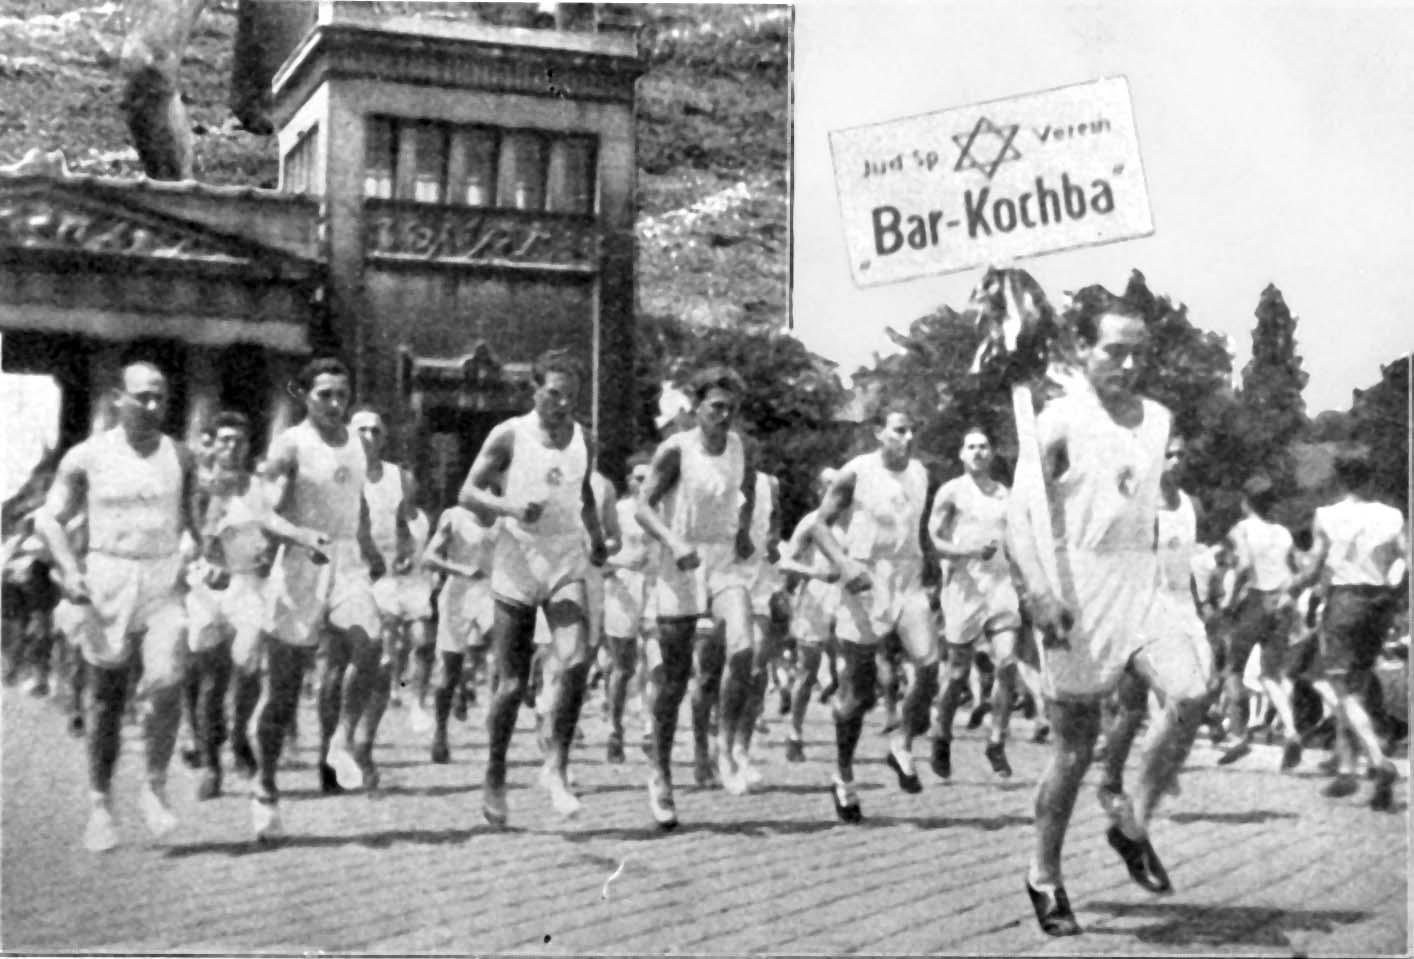 Munich, Germany, Runners from the "Bar Kochba" group in training, 1932